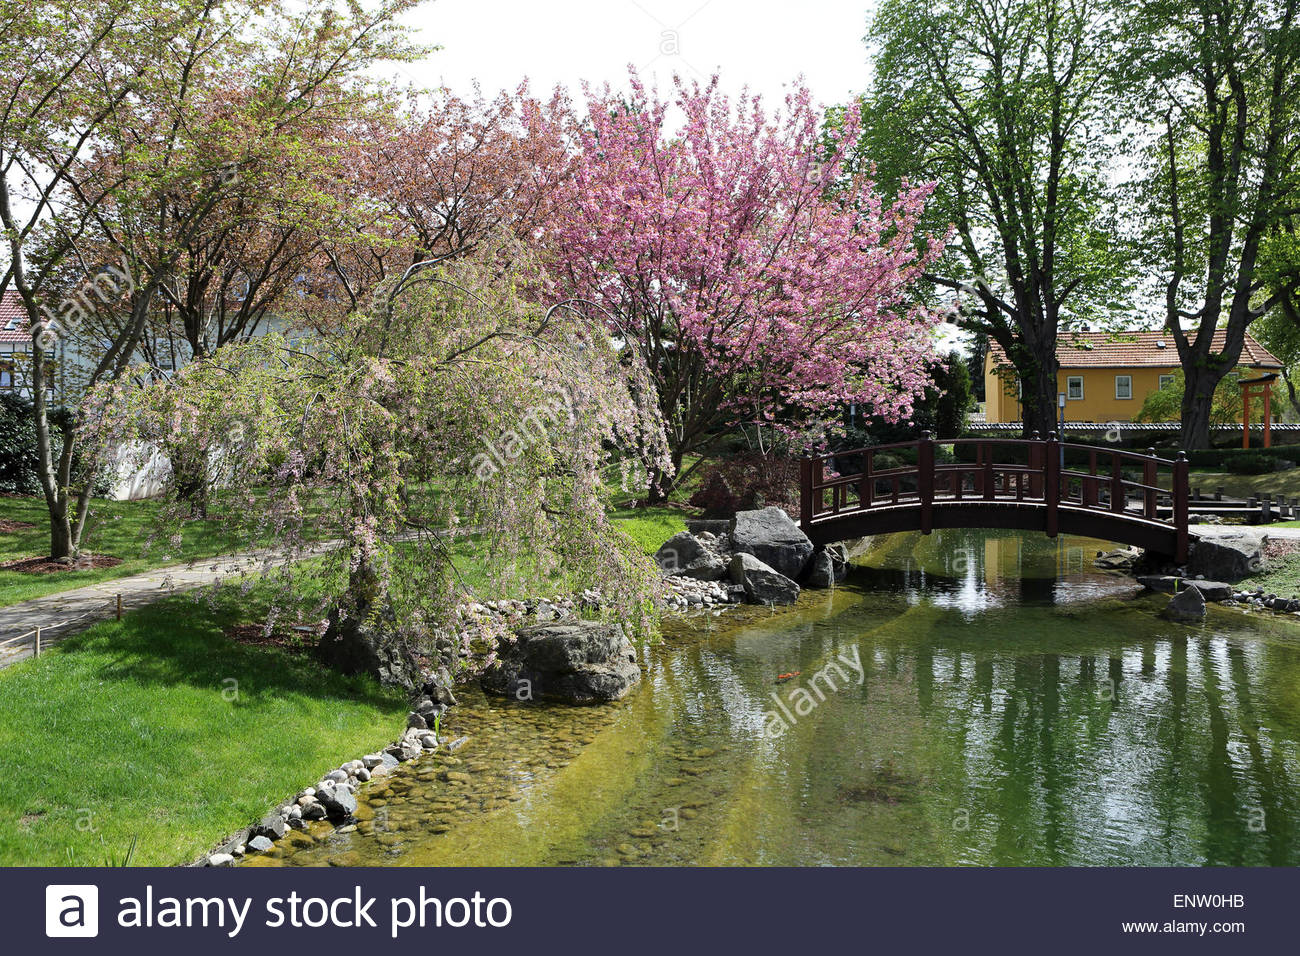 cherry trees blossom by an arched brdige in the japanese garden japanischer ENW0HB